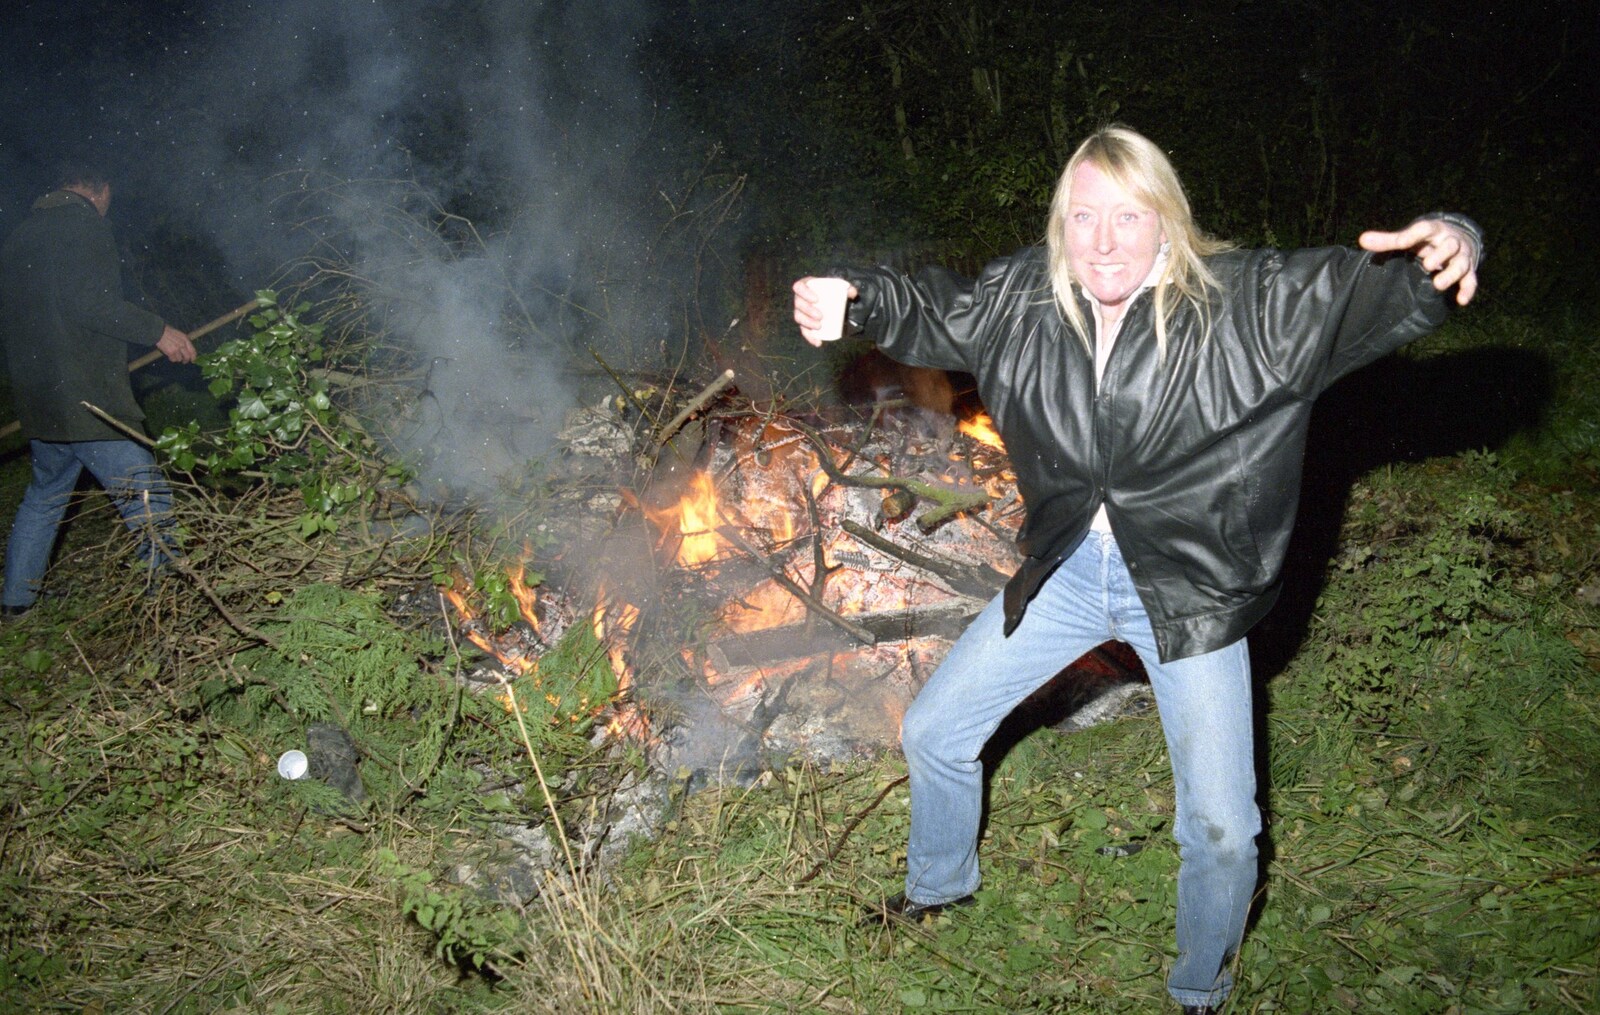 Sue does another Fire Dance from Bonfire Night and Printec at the Stoke Ash White Horse, Suffolk - 5th November 1991